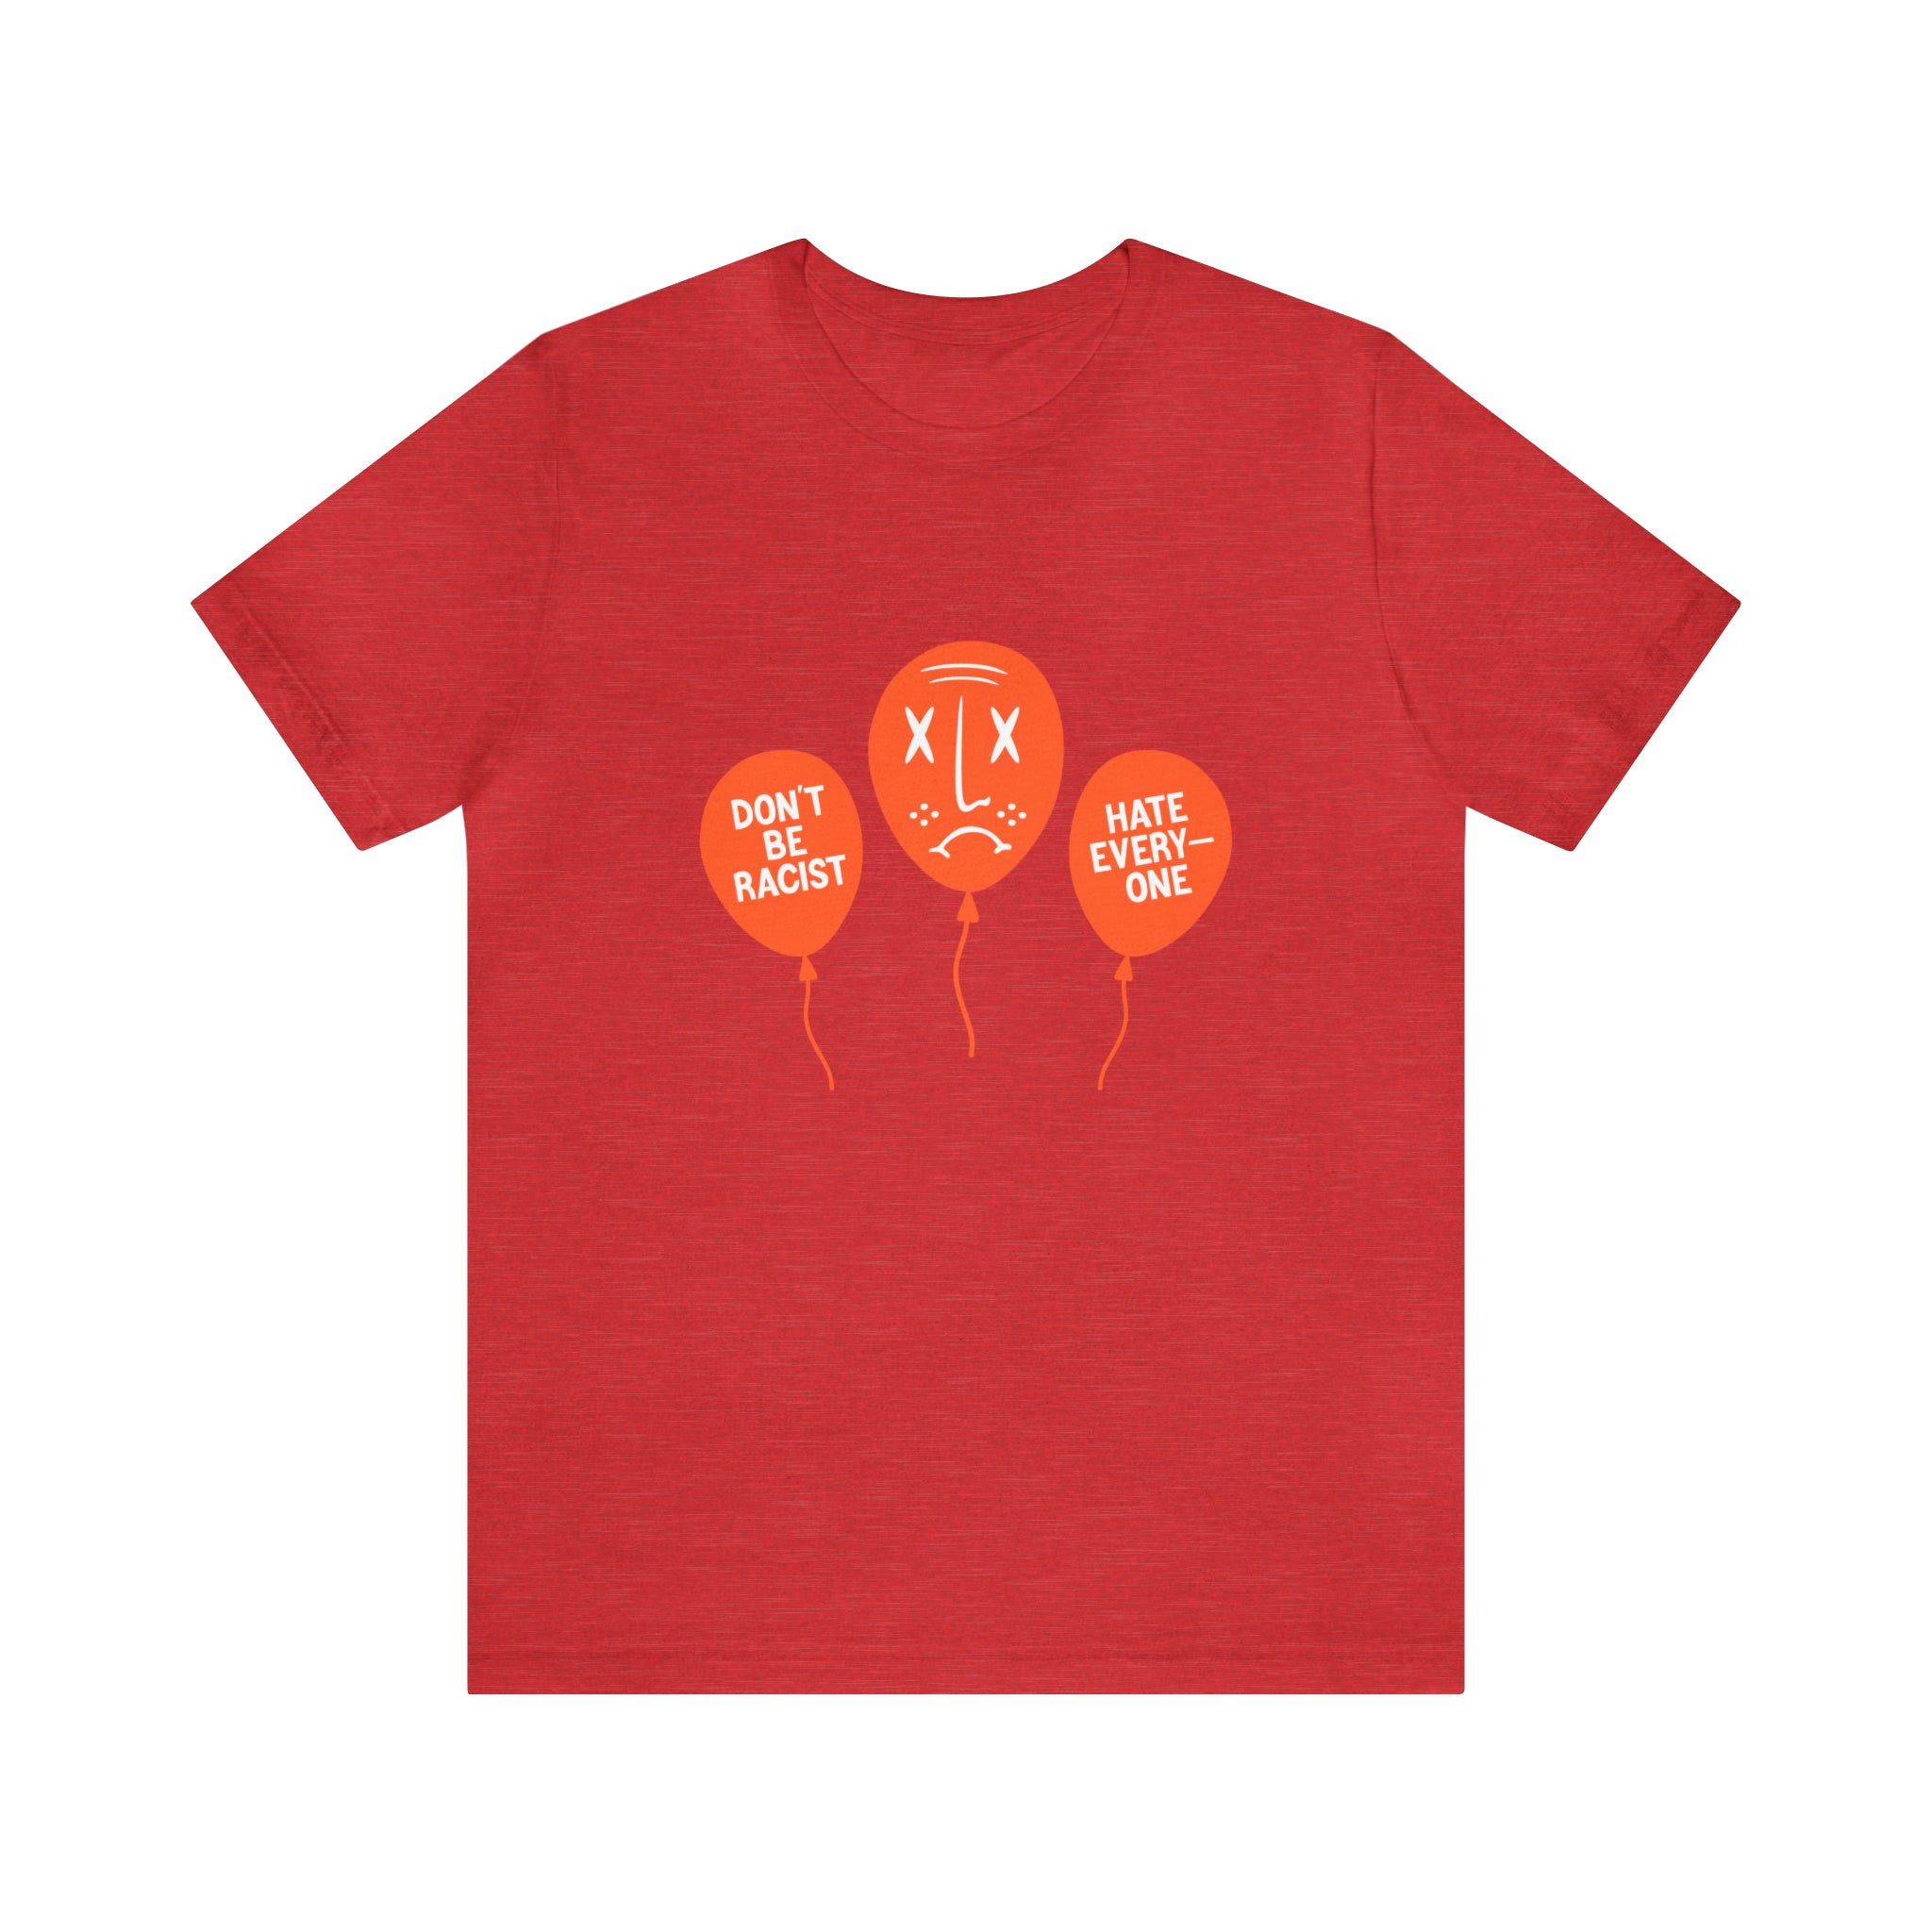 A bold red Don't Be T-Shirt with balloons on it.